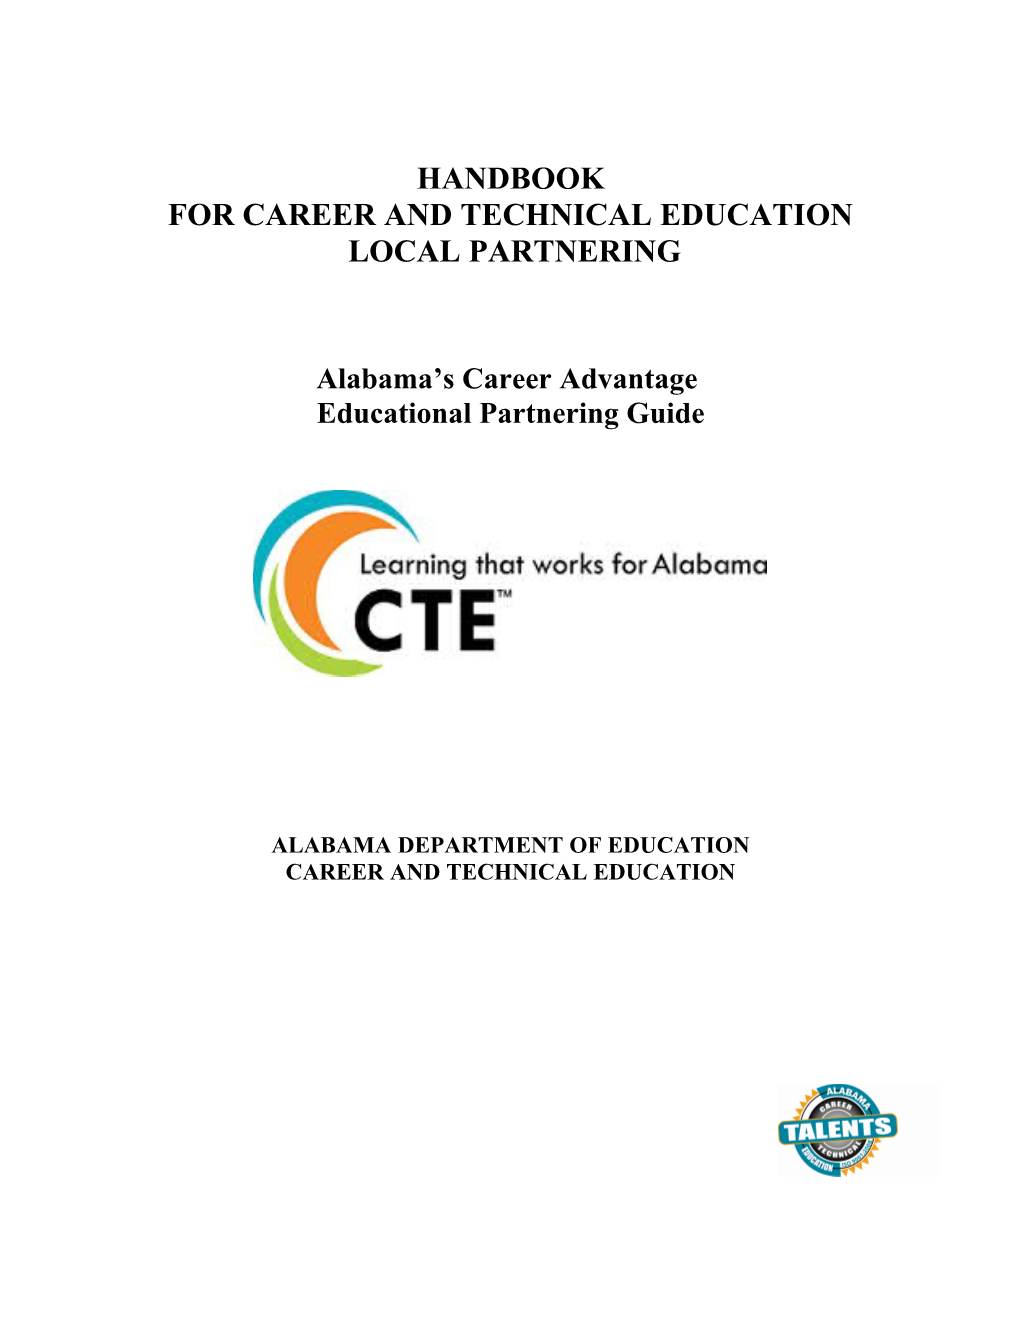 For Career and Technical Education